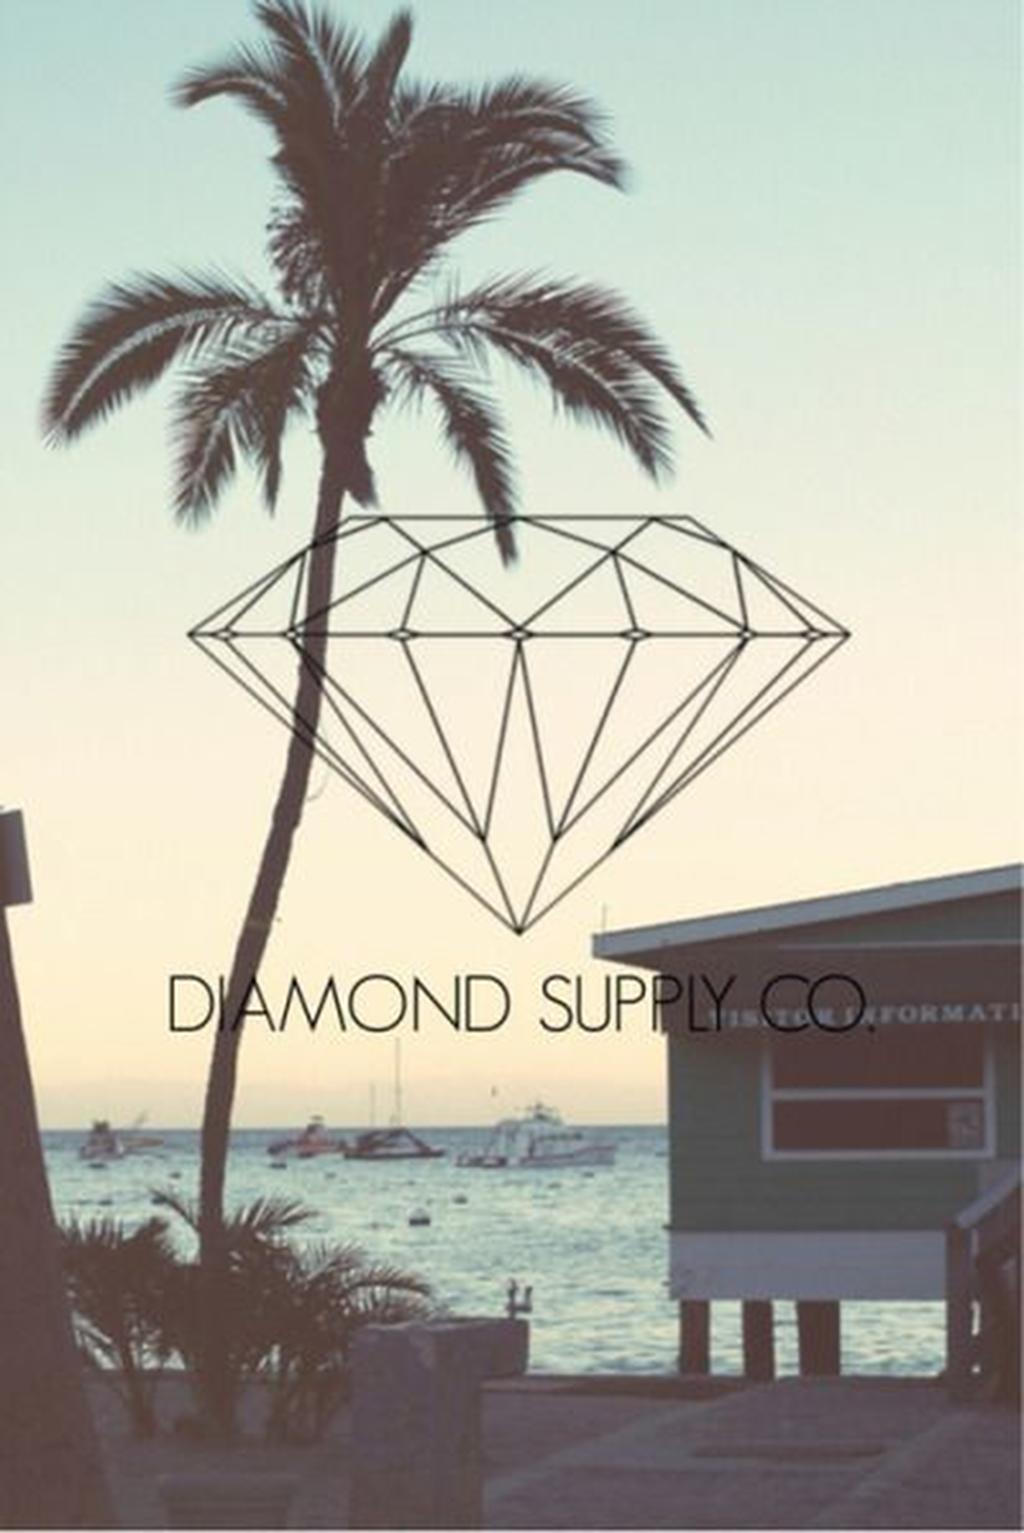 More Wallpaper Collections - Iphone Wallpaper Diamond Supply , HD Wallpaper & Backgrounds